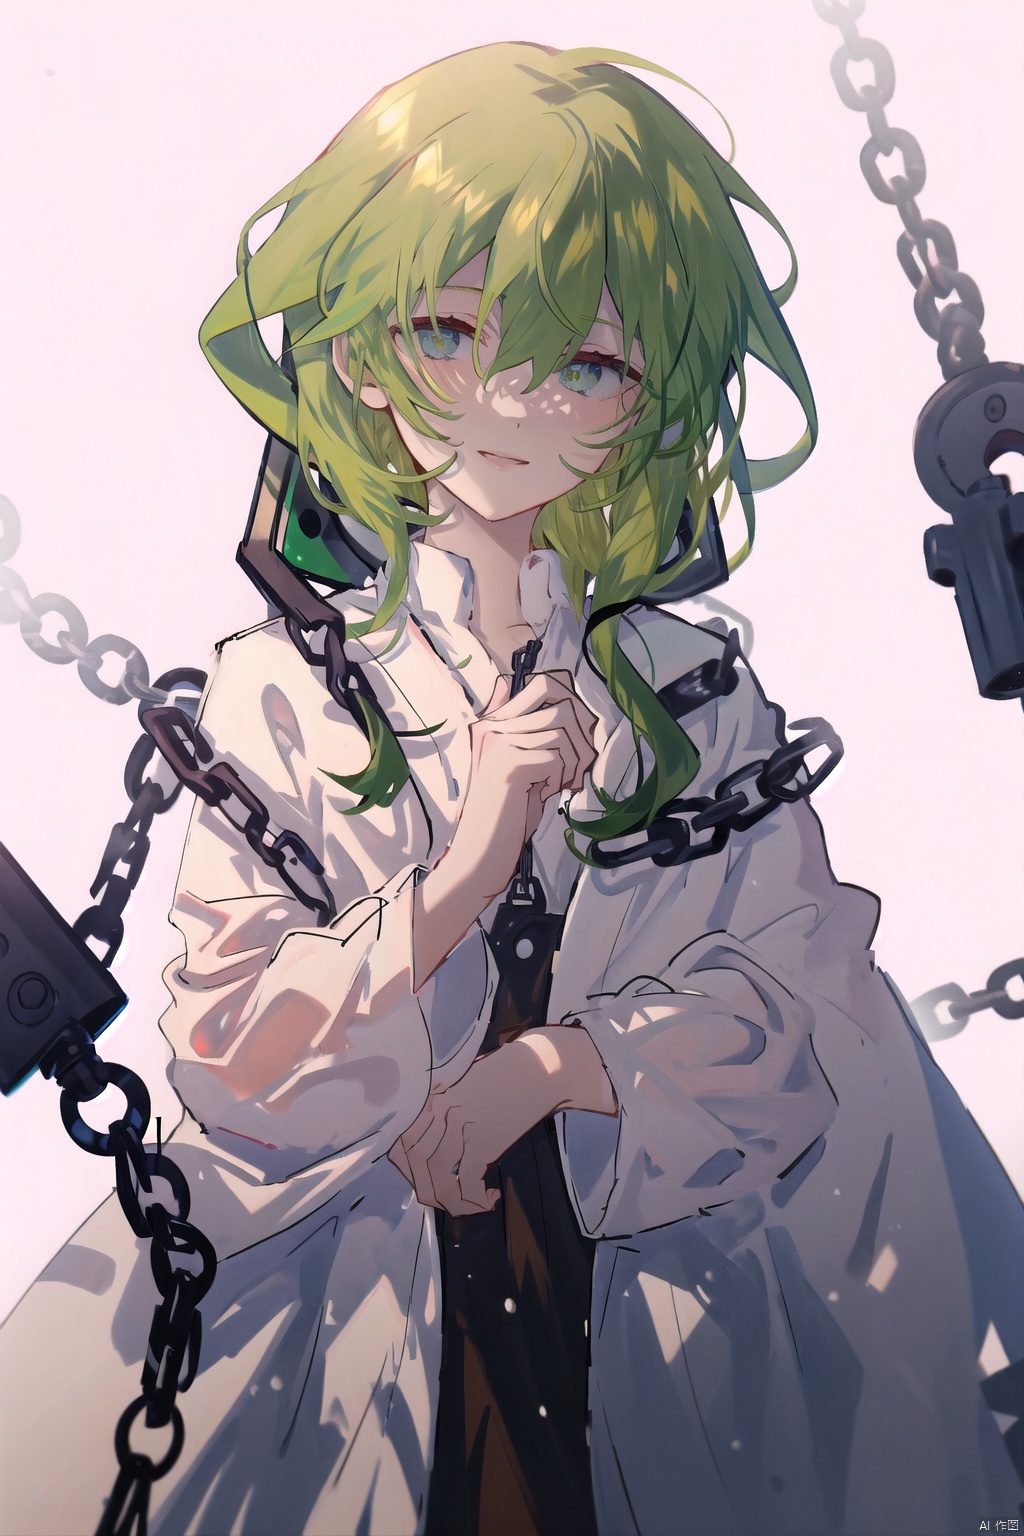 a portrait of Enkidu from Fate, a genderless clay doll with green hair and eyes, wearing a white robe, holding a chain in one hand and smiling gently